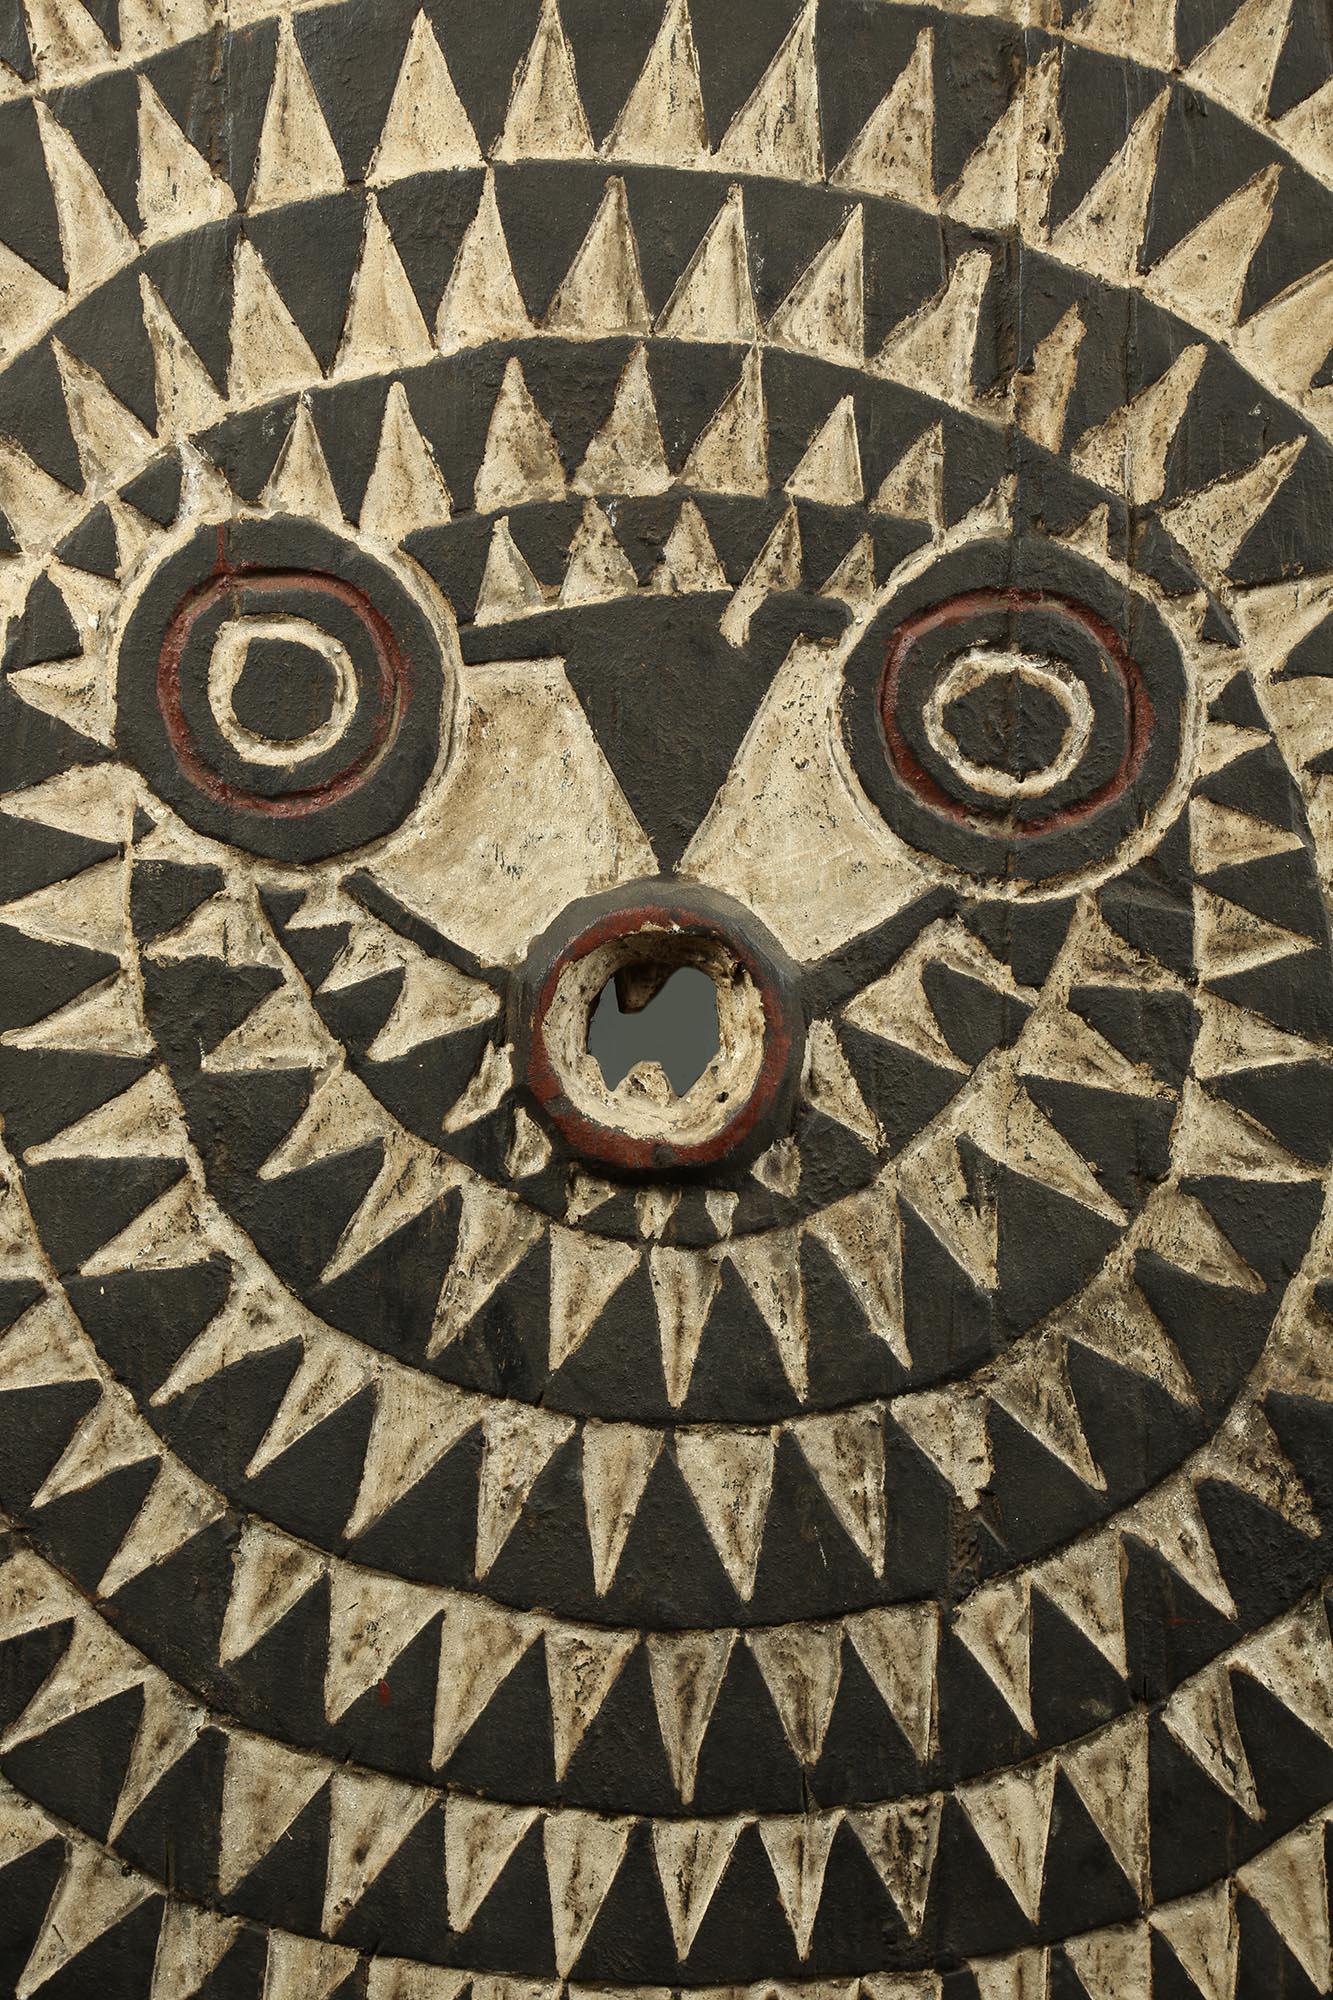 Large decorative round flat carved wood Bwa bird mask with B & W geometric designs, great wall art. Created late 20th century in Africa by the Bwa people in Burkina Faso, probably for the European export market. Fabulous bird face in center with